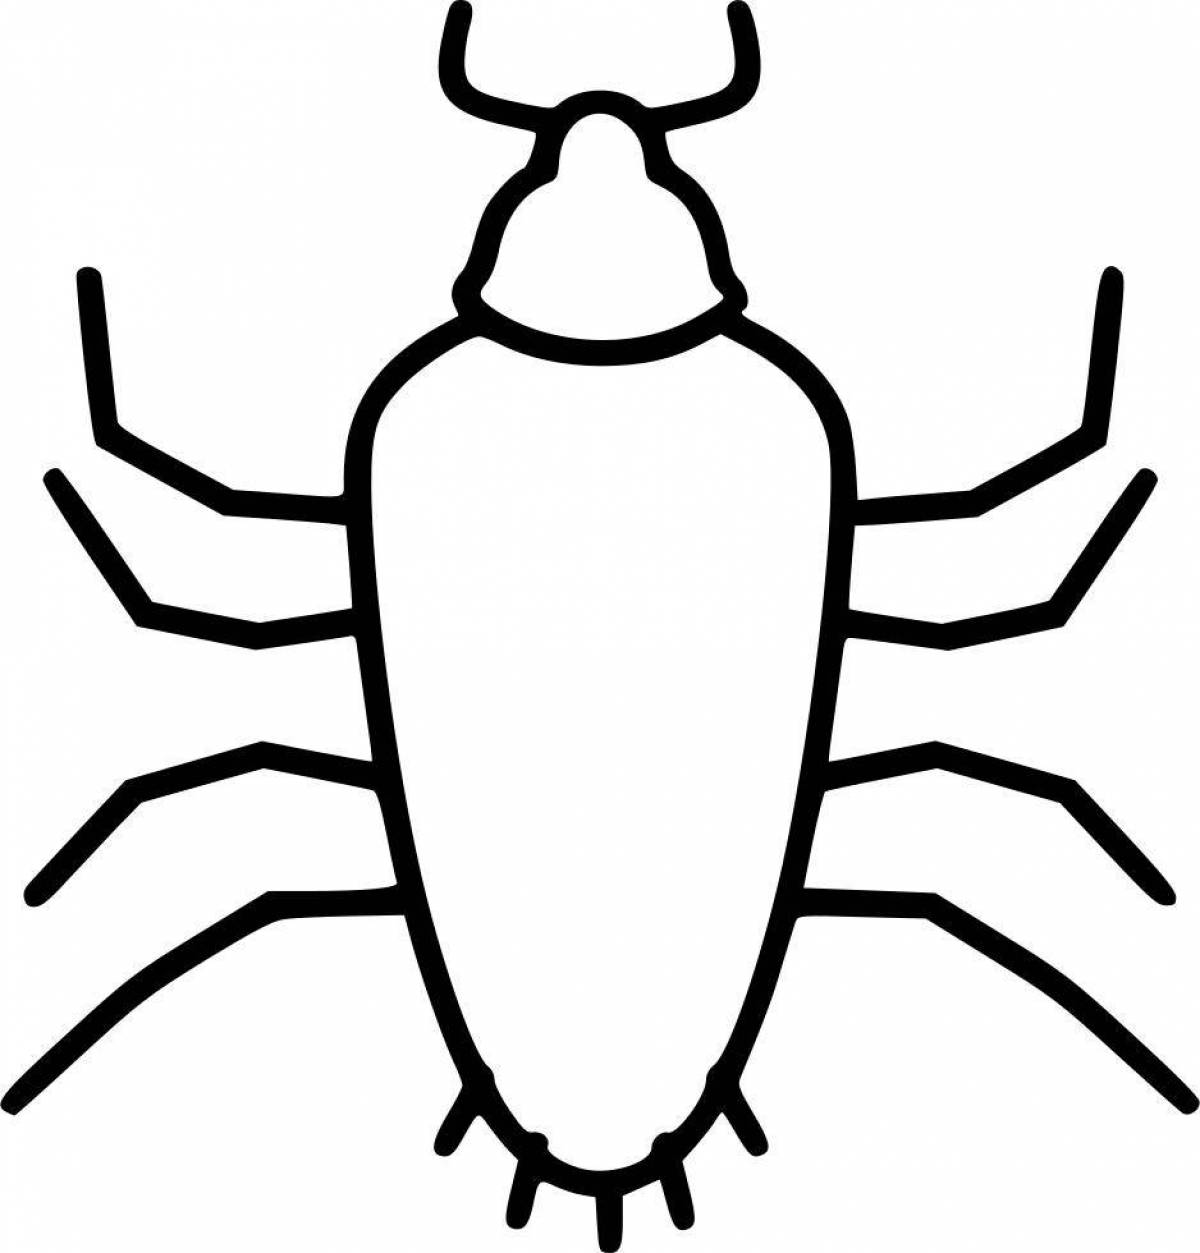 Playful cockroach coloring page for kids